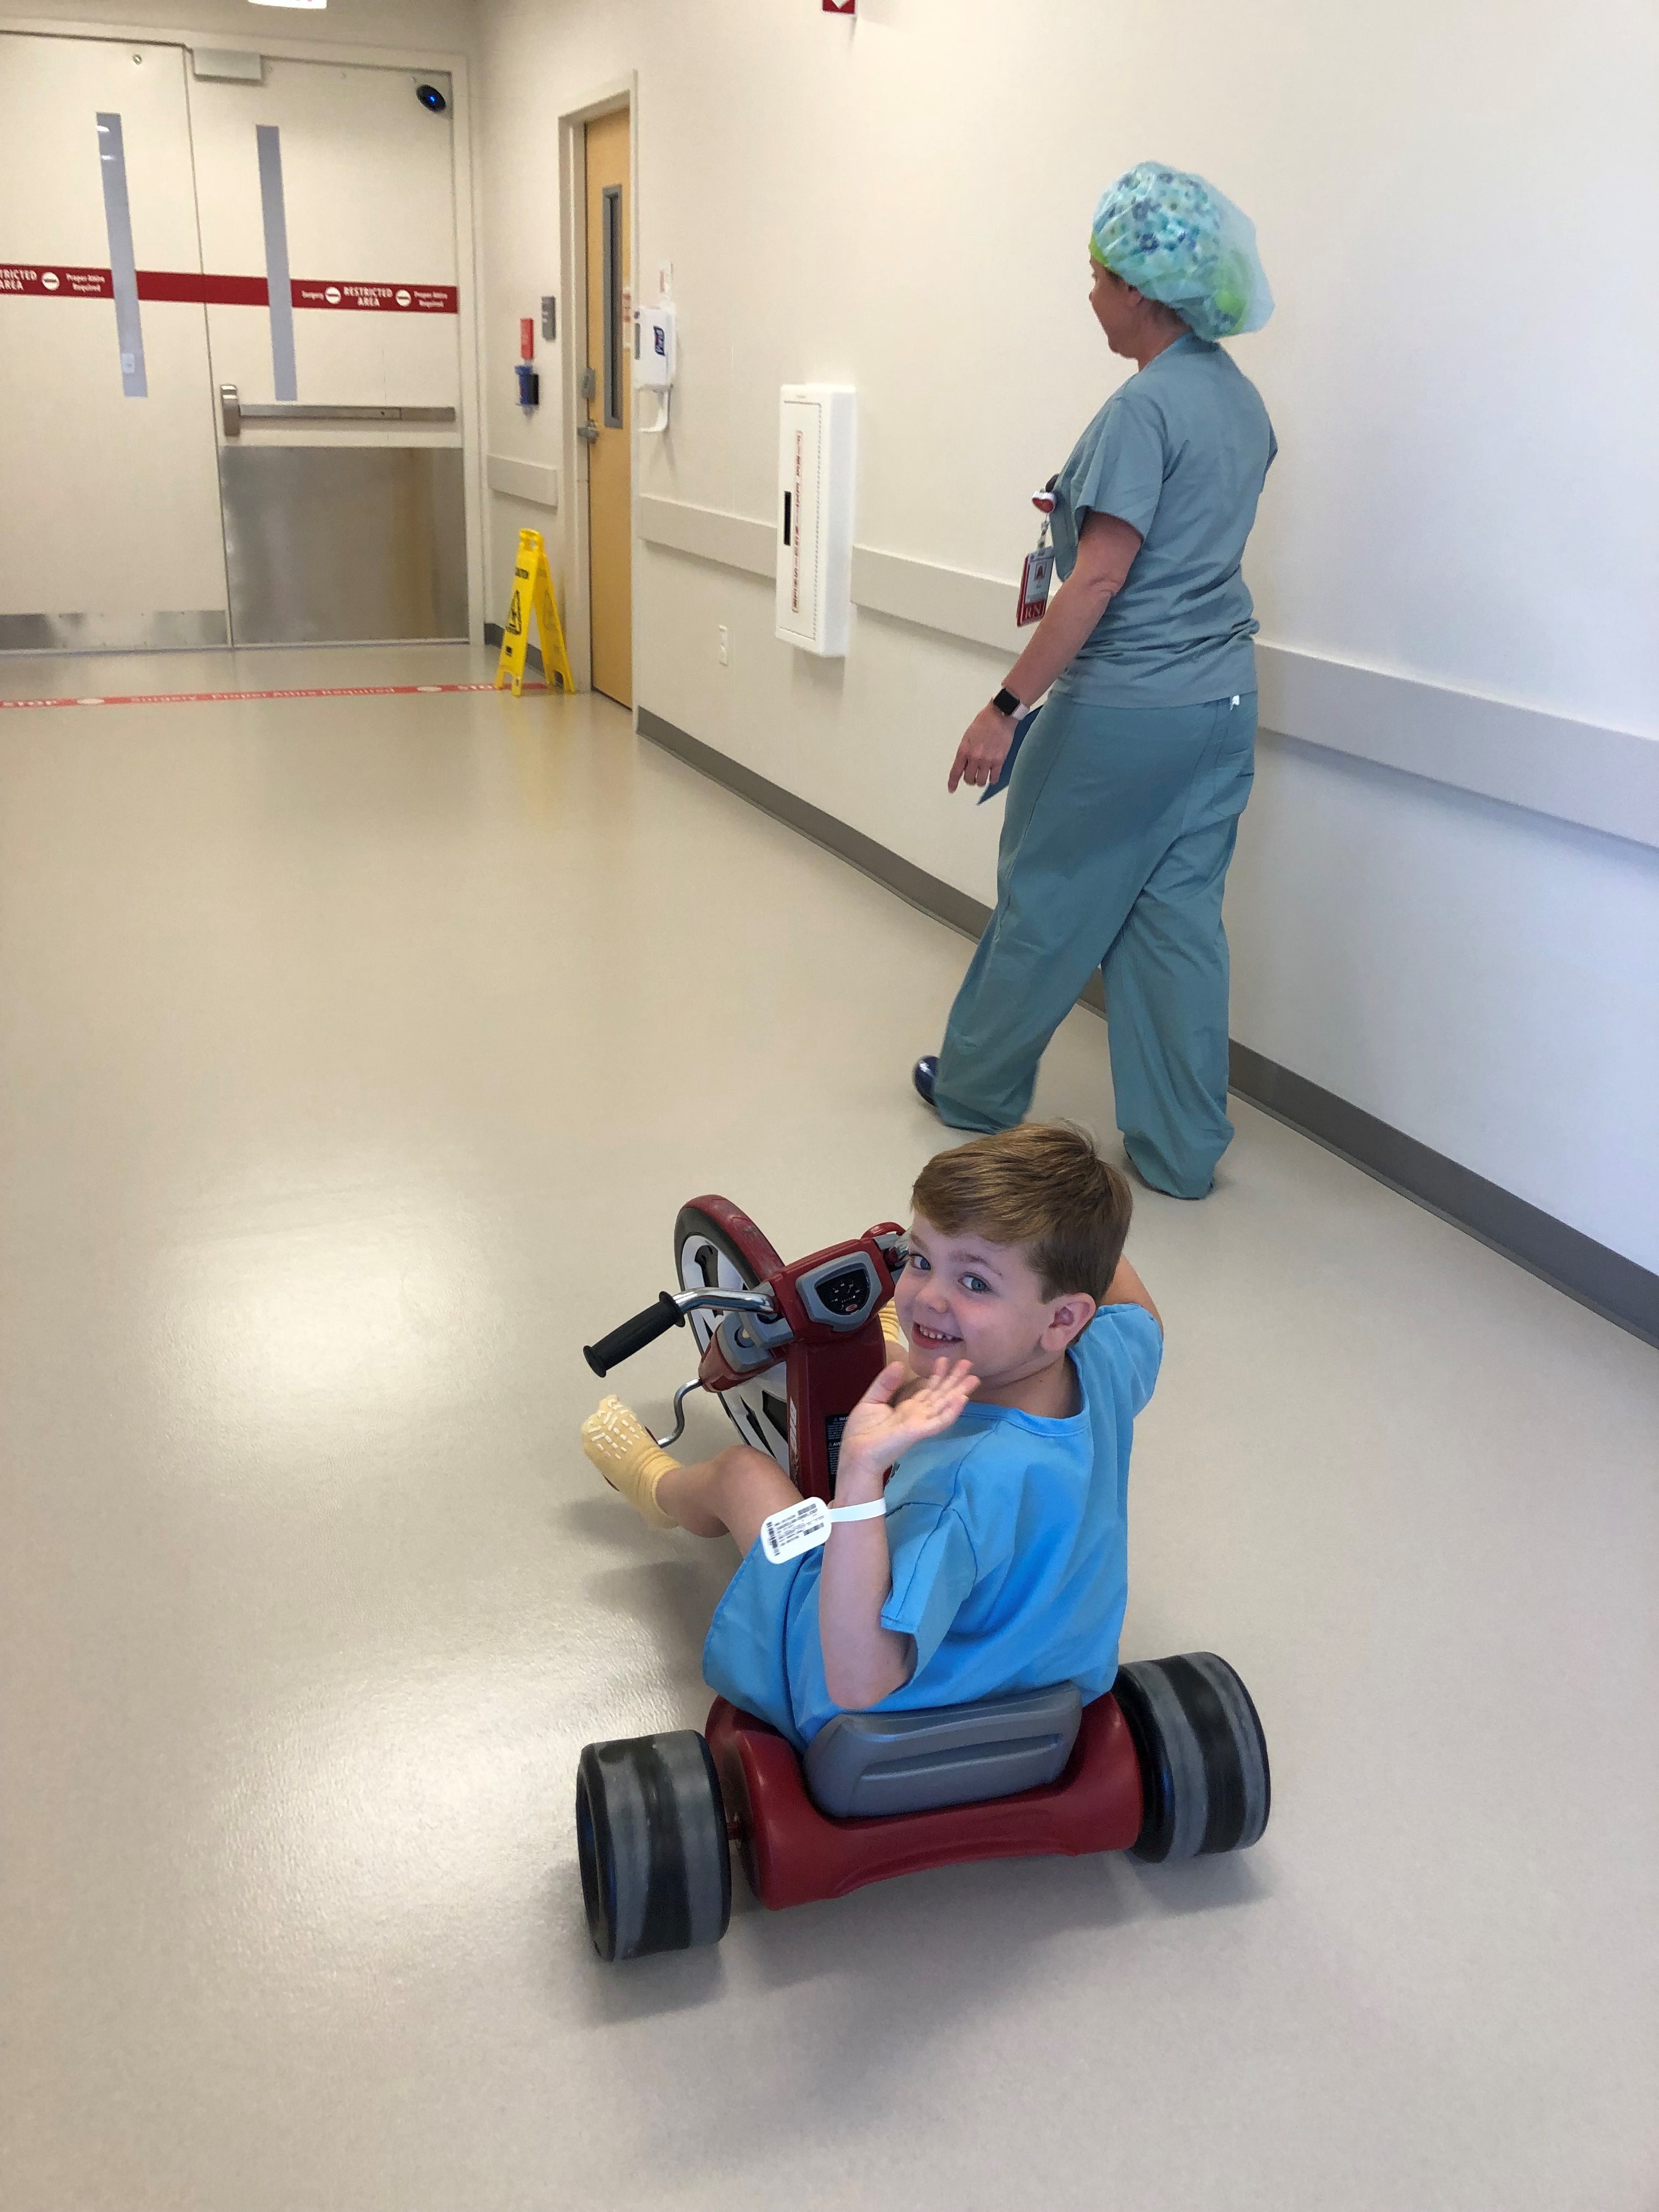 child riding motorcycle into surgery